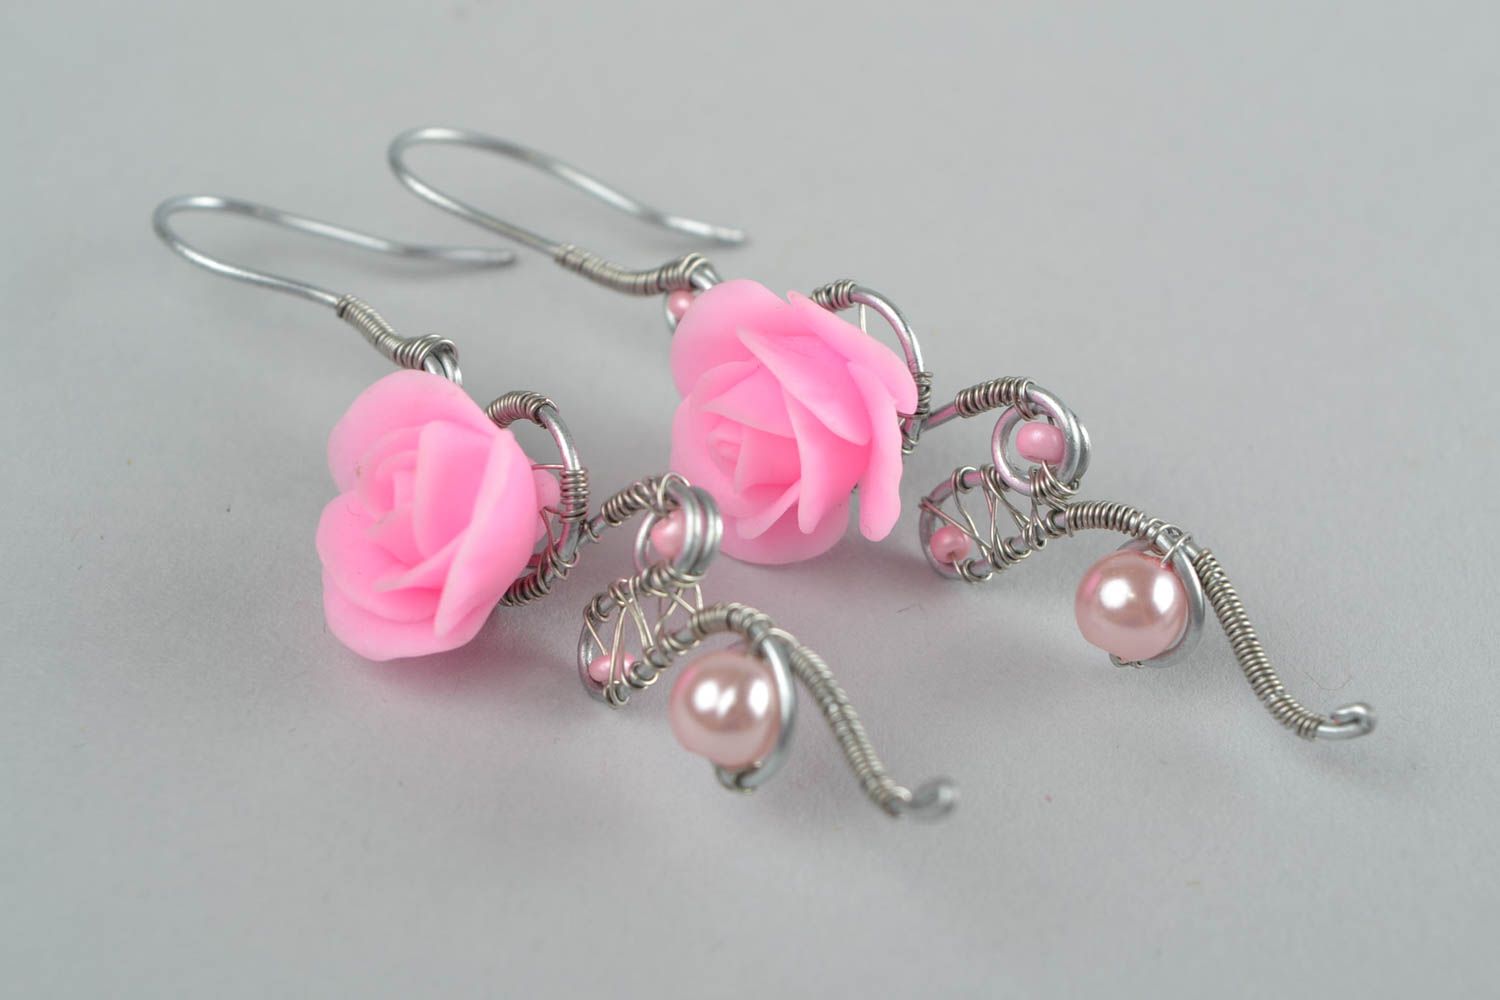 Handmade wire wrap earrings with pink polymer clay flowers Roses photo 3